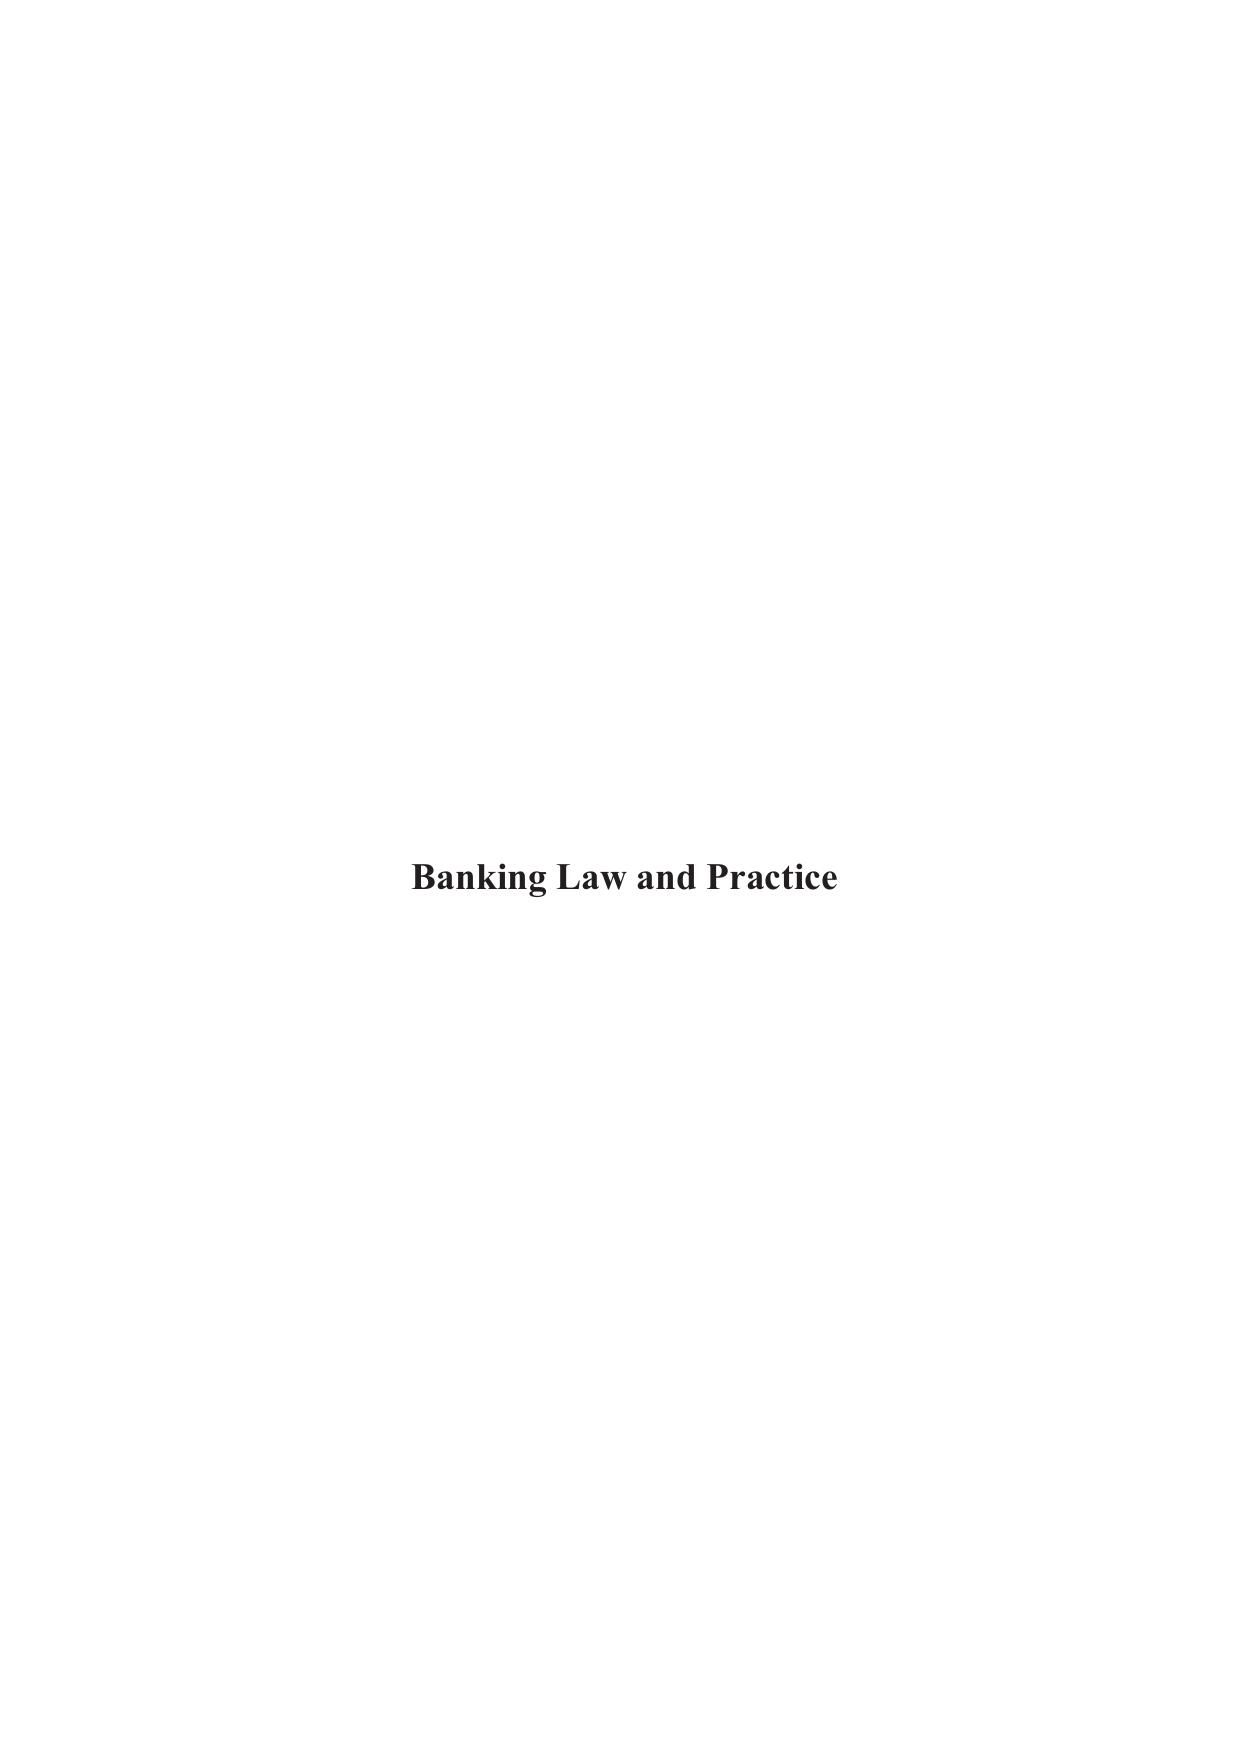 Banking Law and Practice 2013